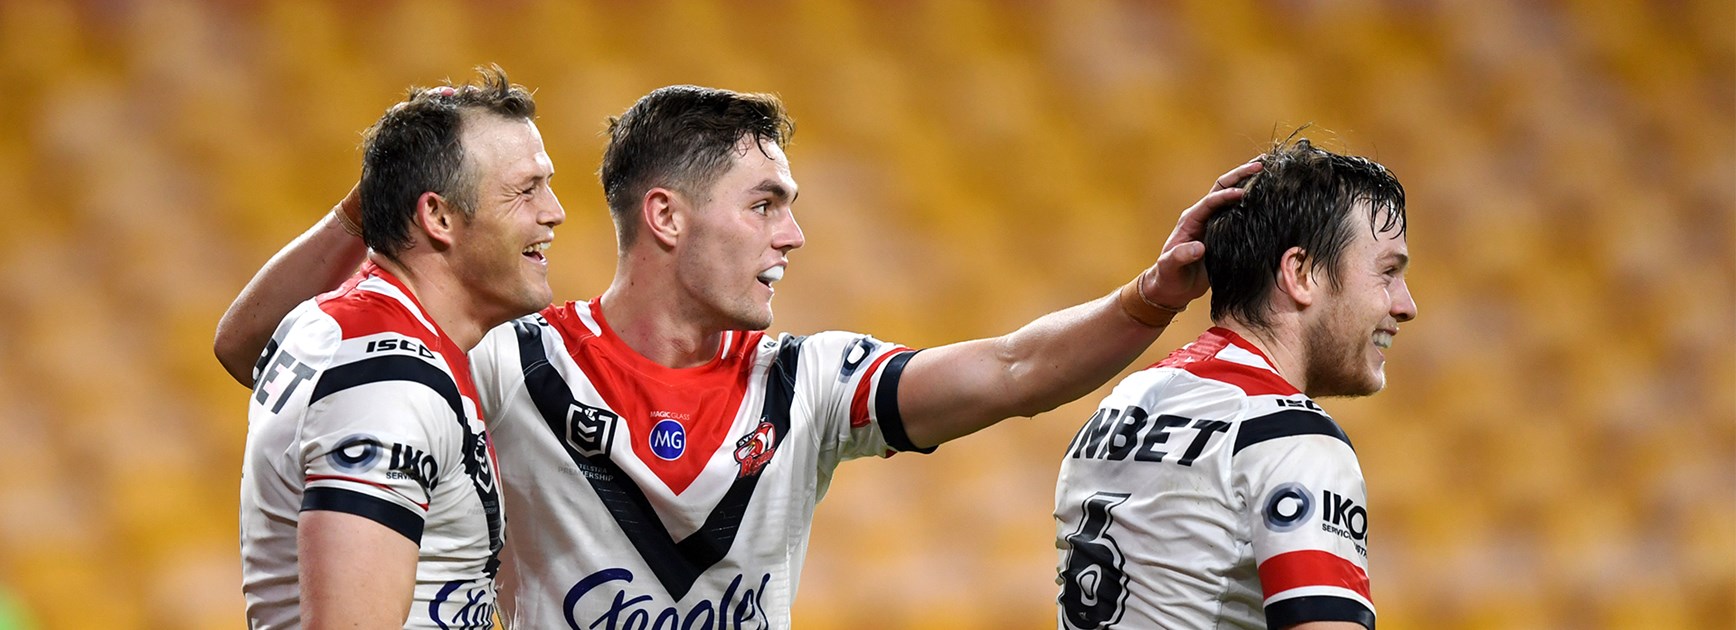 Clash of the sevens: Keary impressed by Cleary, Flanagan